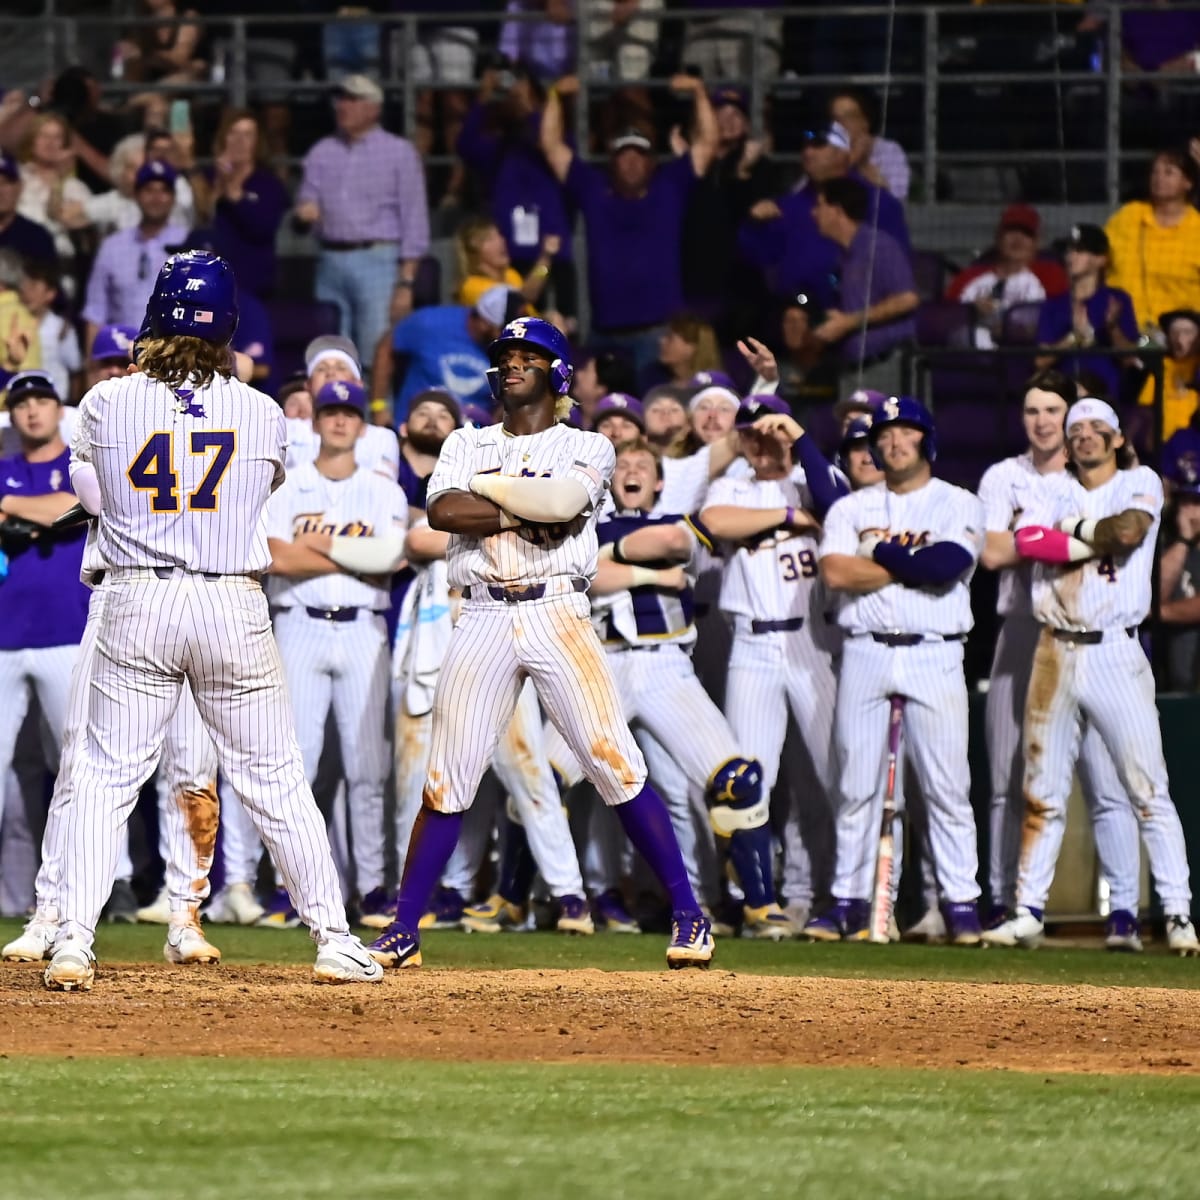 LSU defeats Nicholls 12-2 for its 10th run-rule victory of the